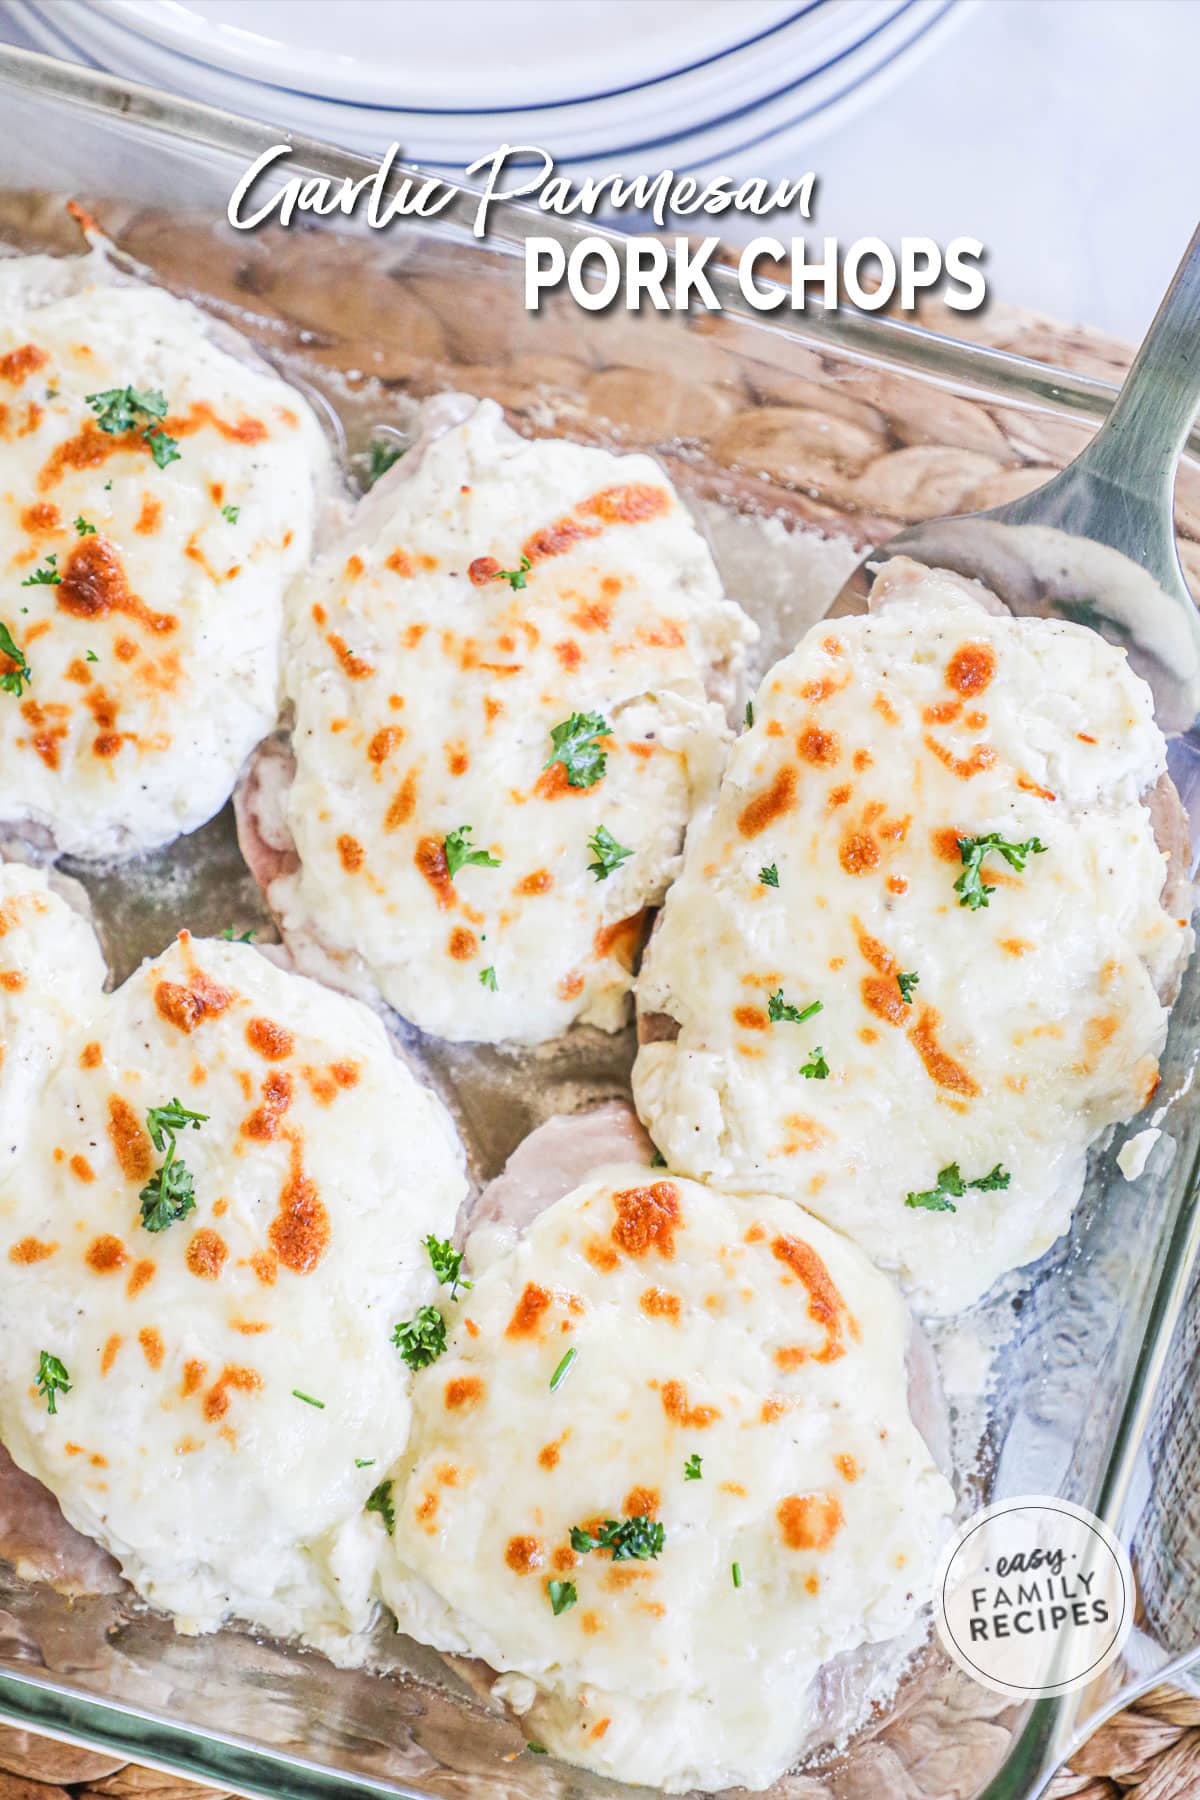 Pork chops covered in cheese sauce that is golden brown and topped with parsley.